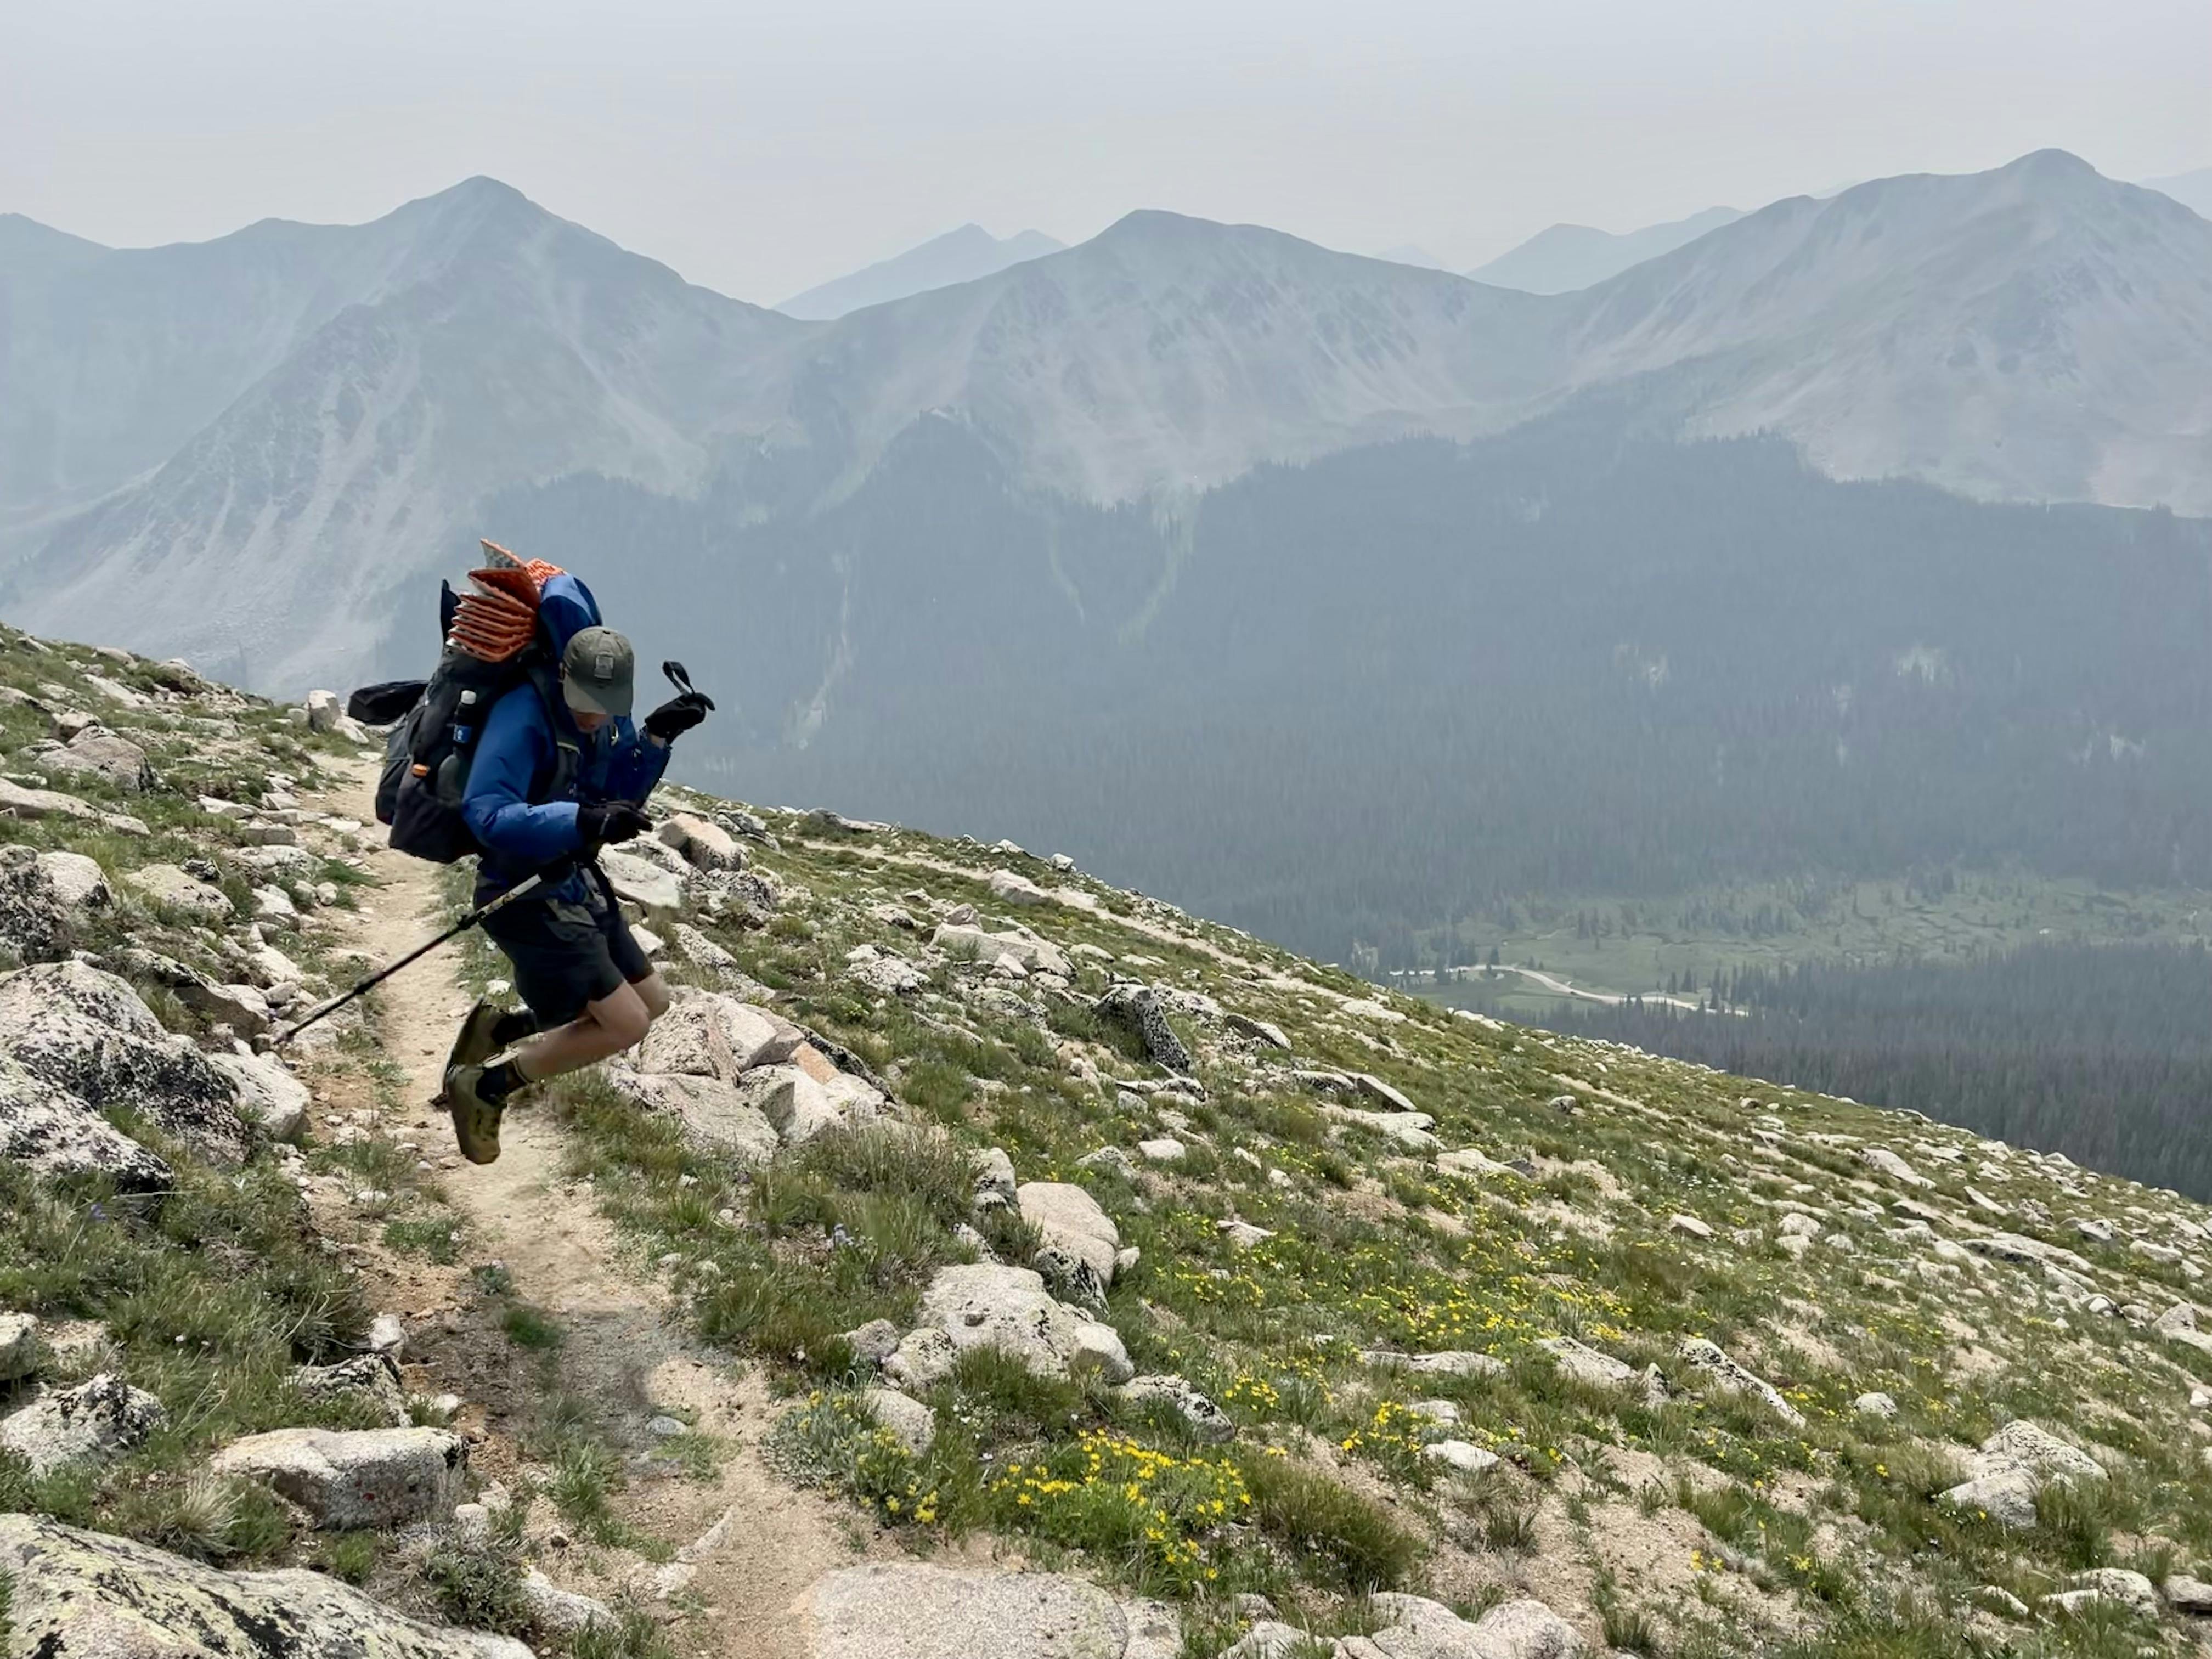 A backpacker with a backpacking setup jumps on the trail. There are mountains in the background.